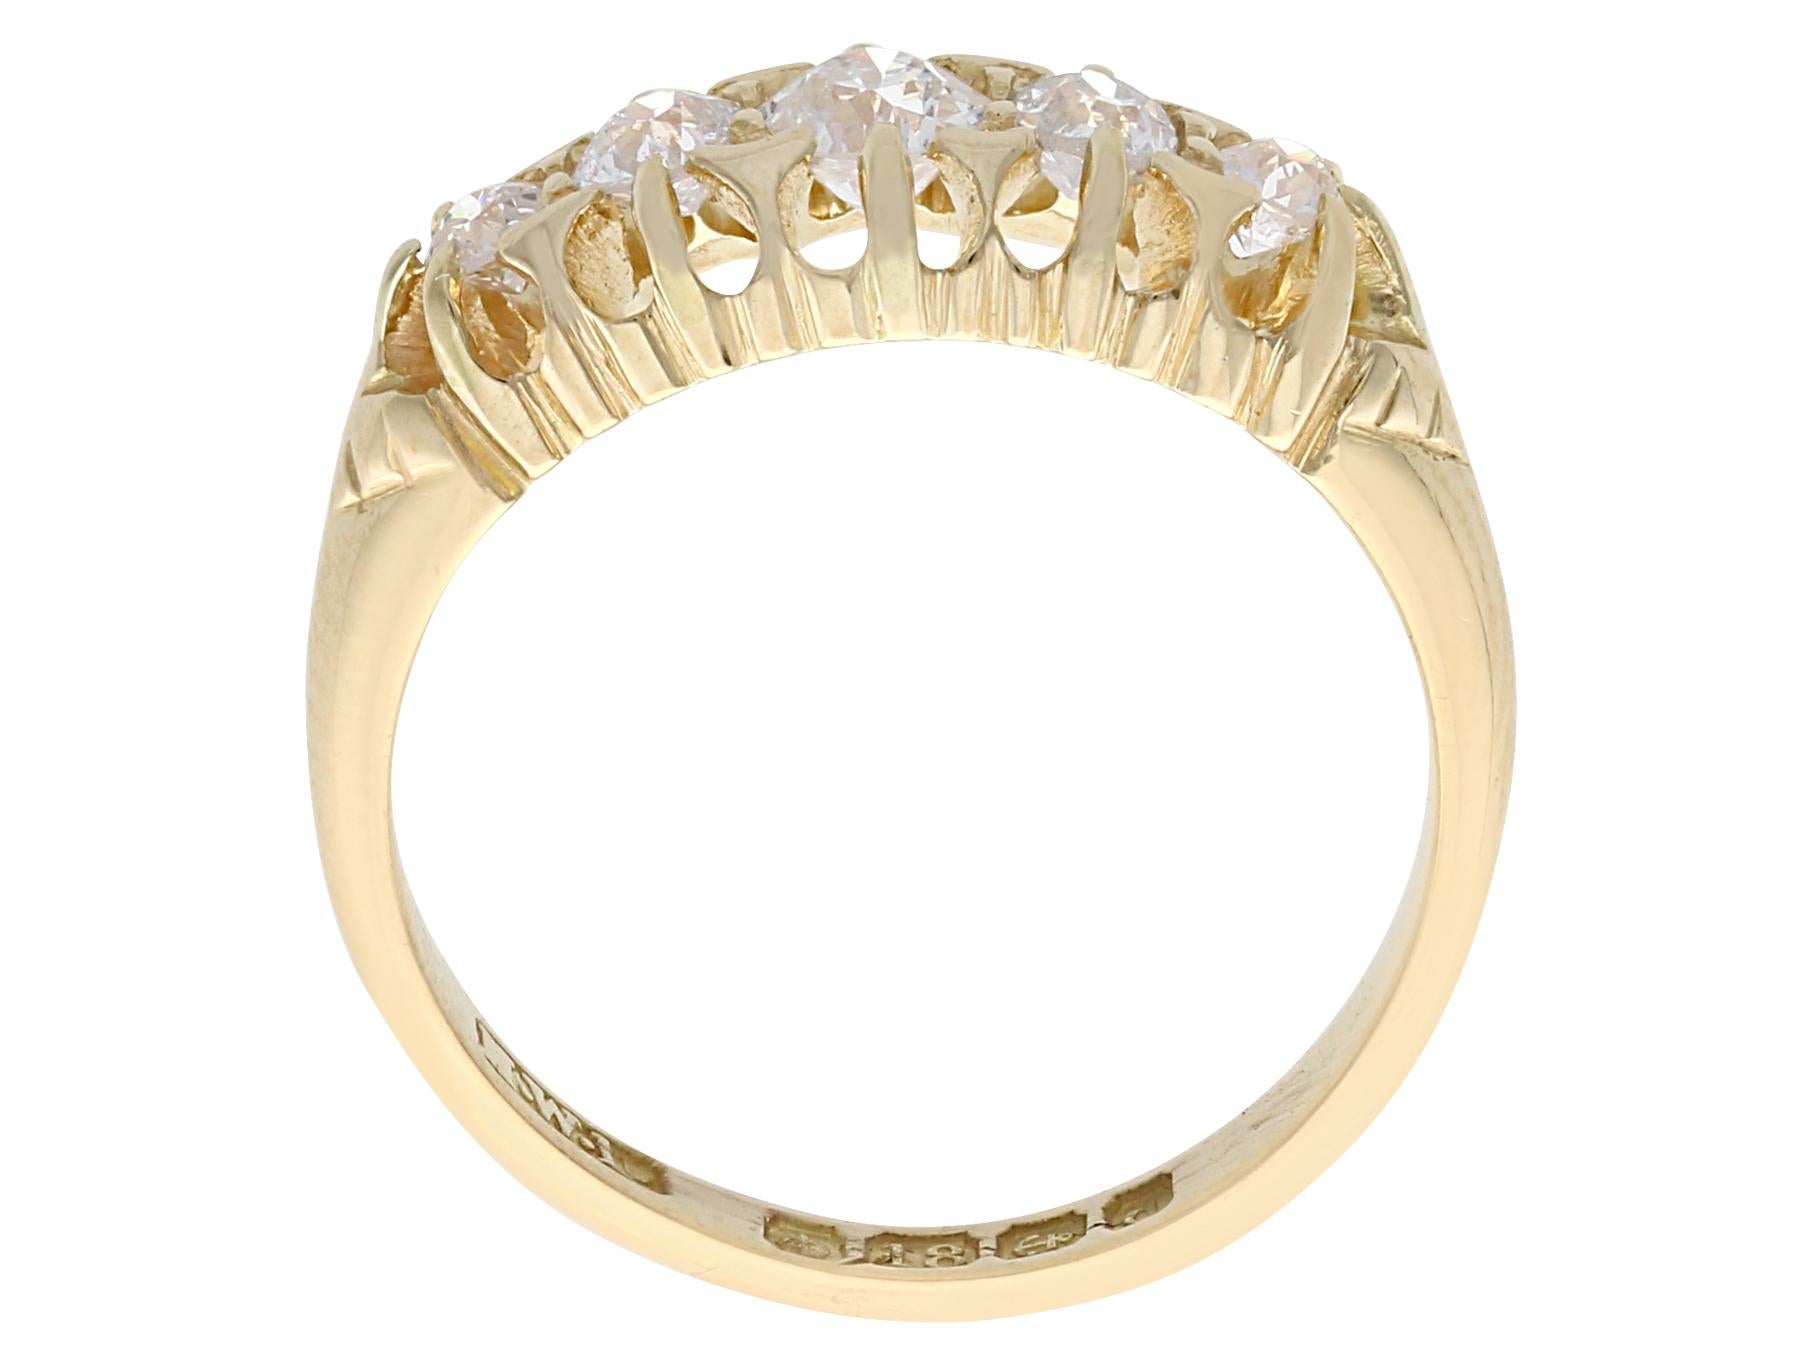 Antique Diamond and 18K Yellow Gold Five Stone Ring In Excellent Condition For Sale In Jesmond, Newcastle Upon Tyne